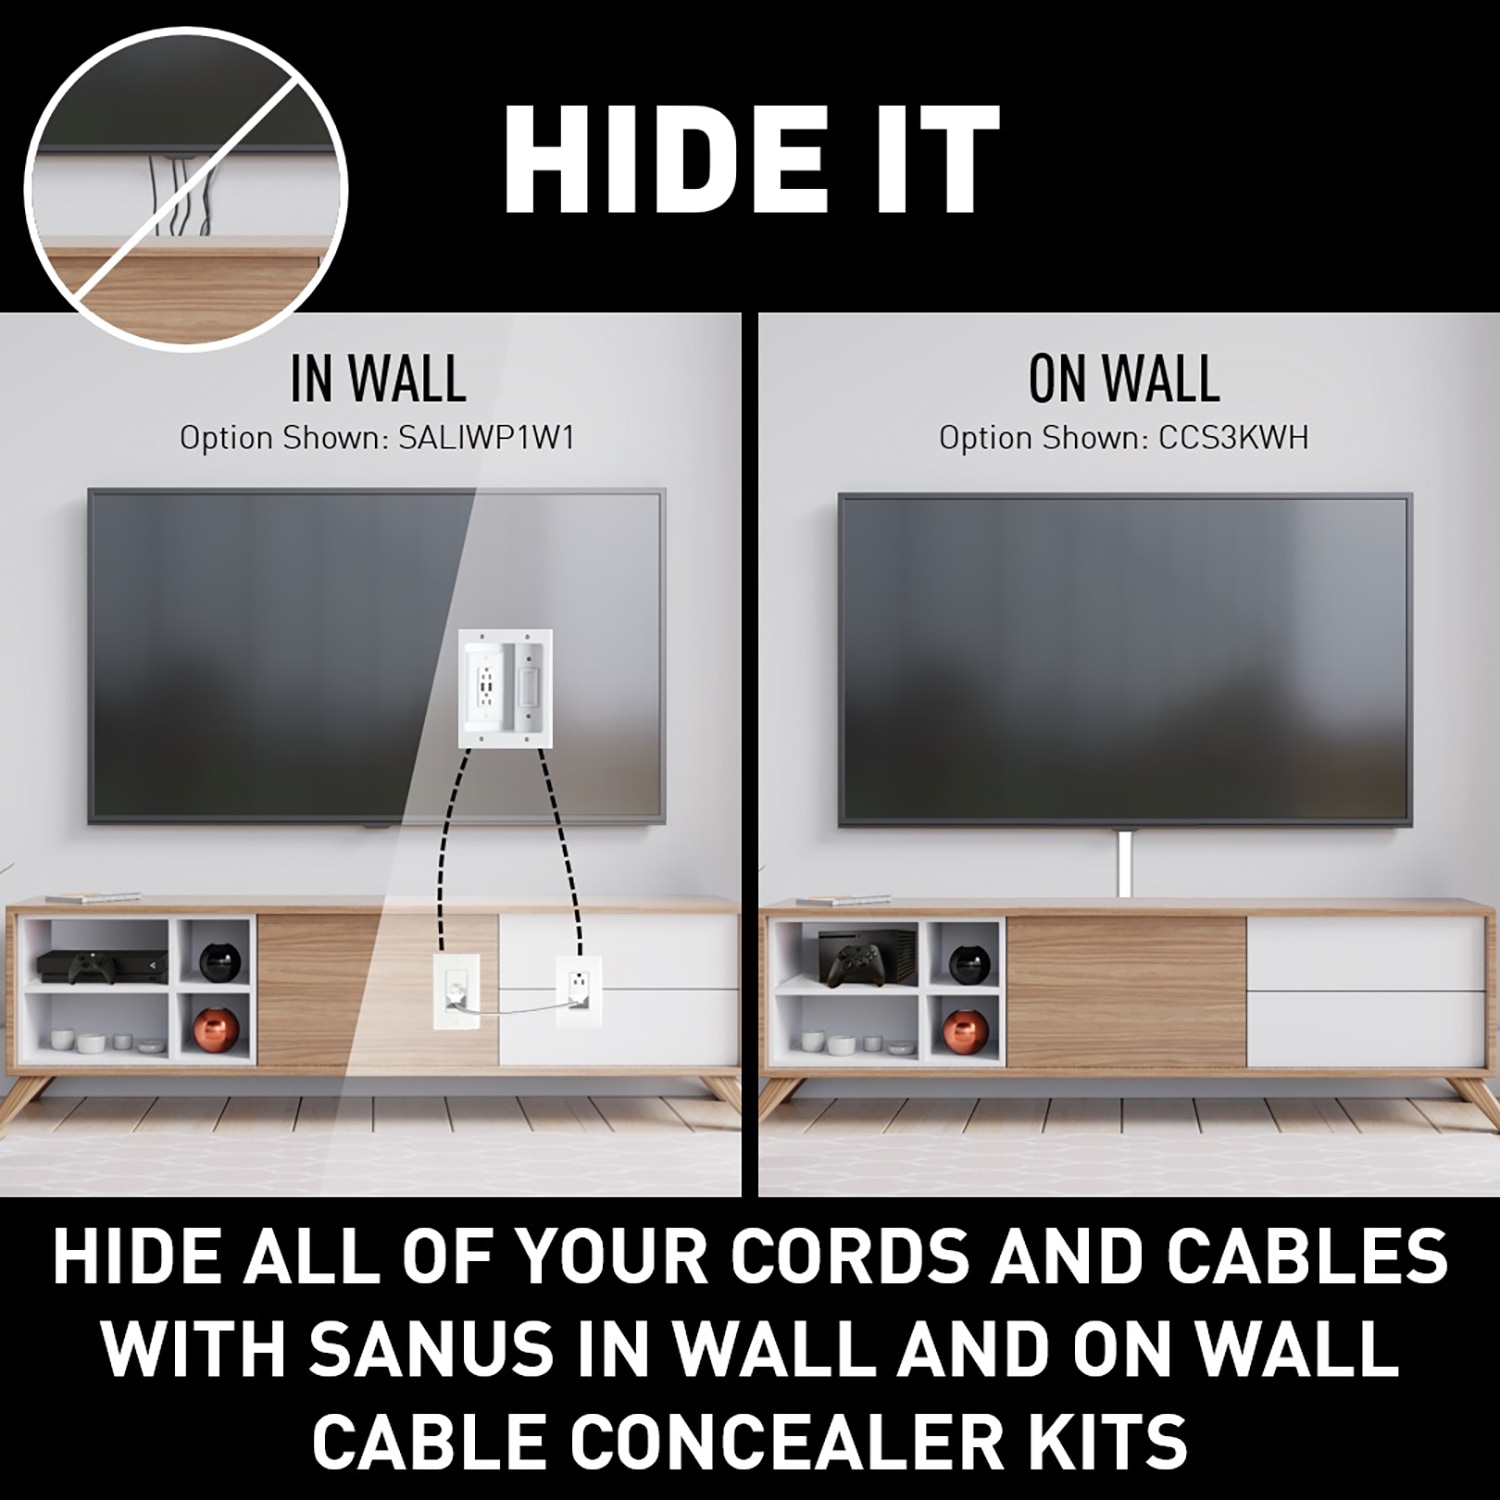 Sanus On-Wall Cable Concealer Cord Cover Kit for Mounted TVs - White - 1 Each 6537749